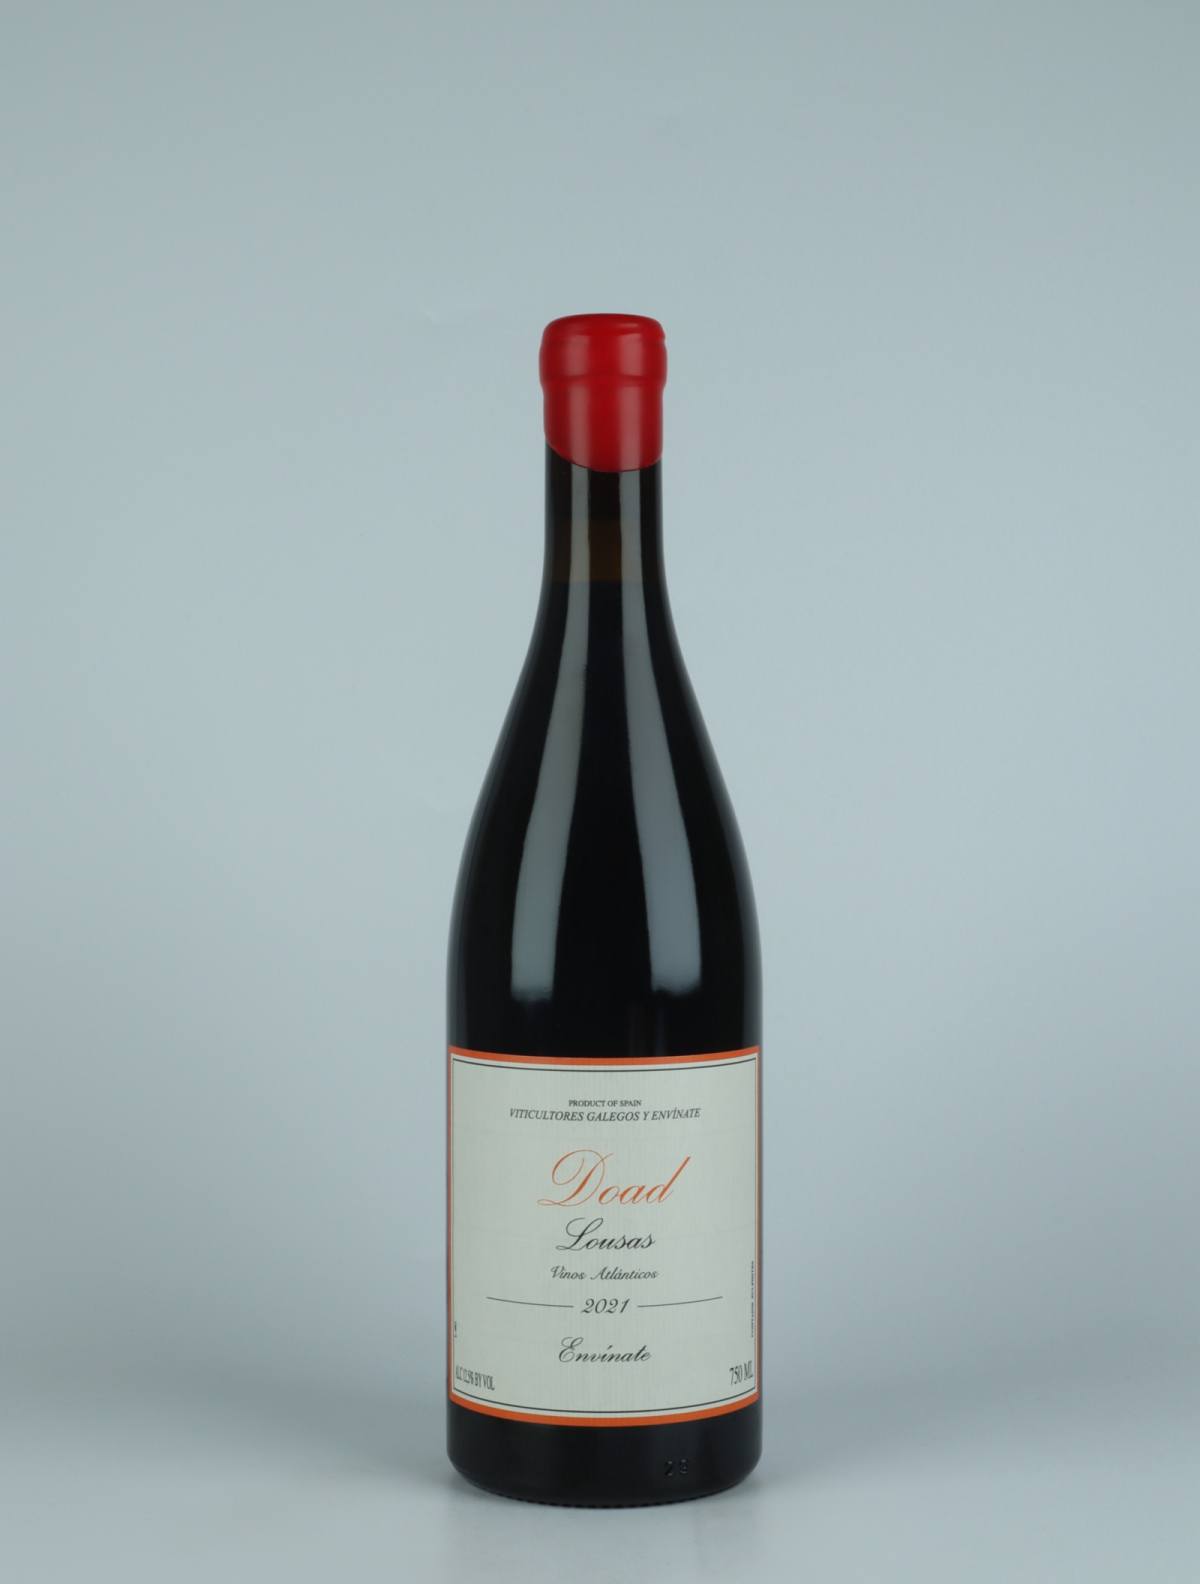 A bottle 2021 Doade - Ribeira Sacra Red wine from , Ribeira Sacra in Spain